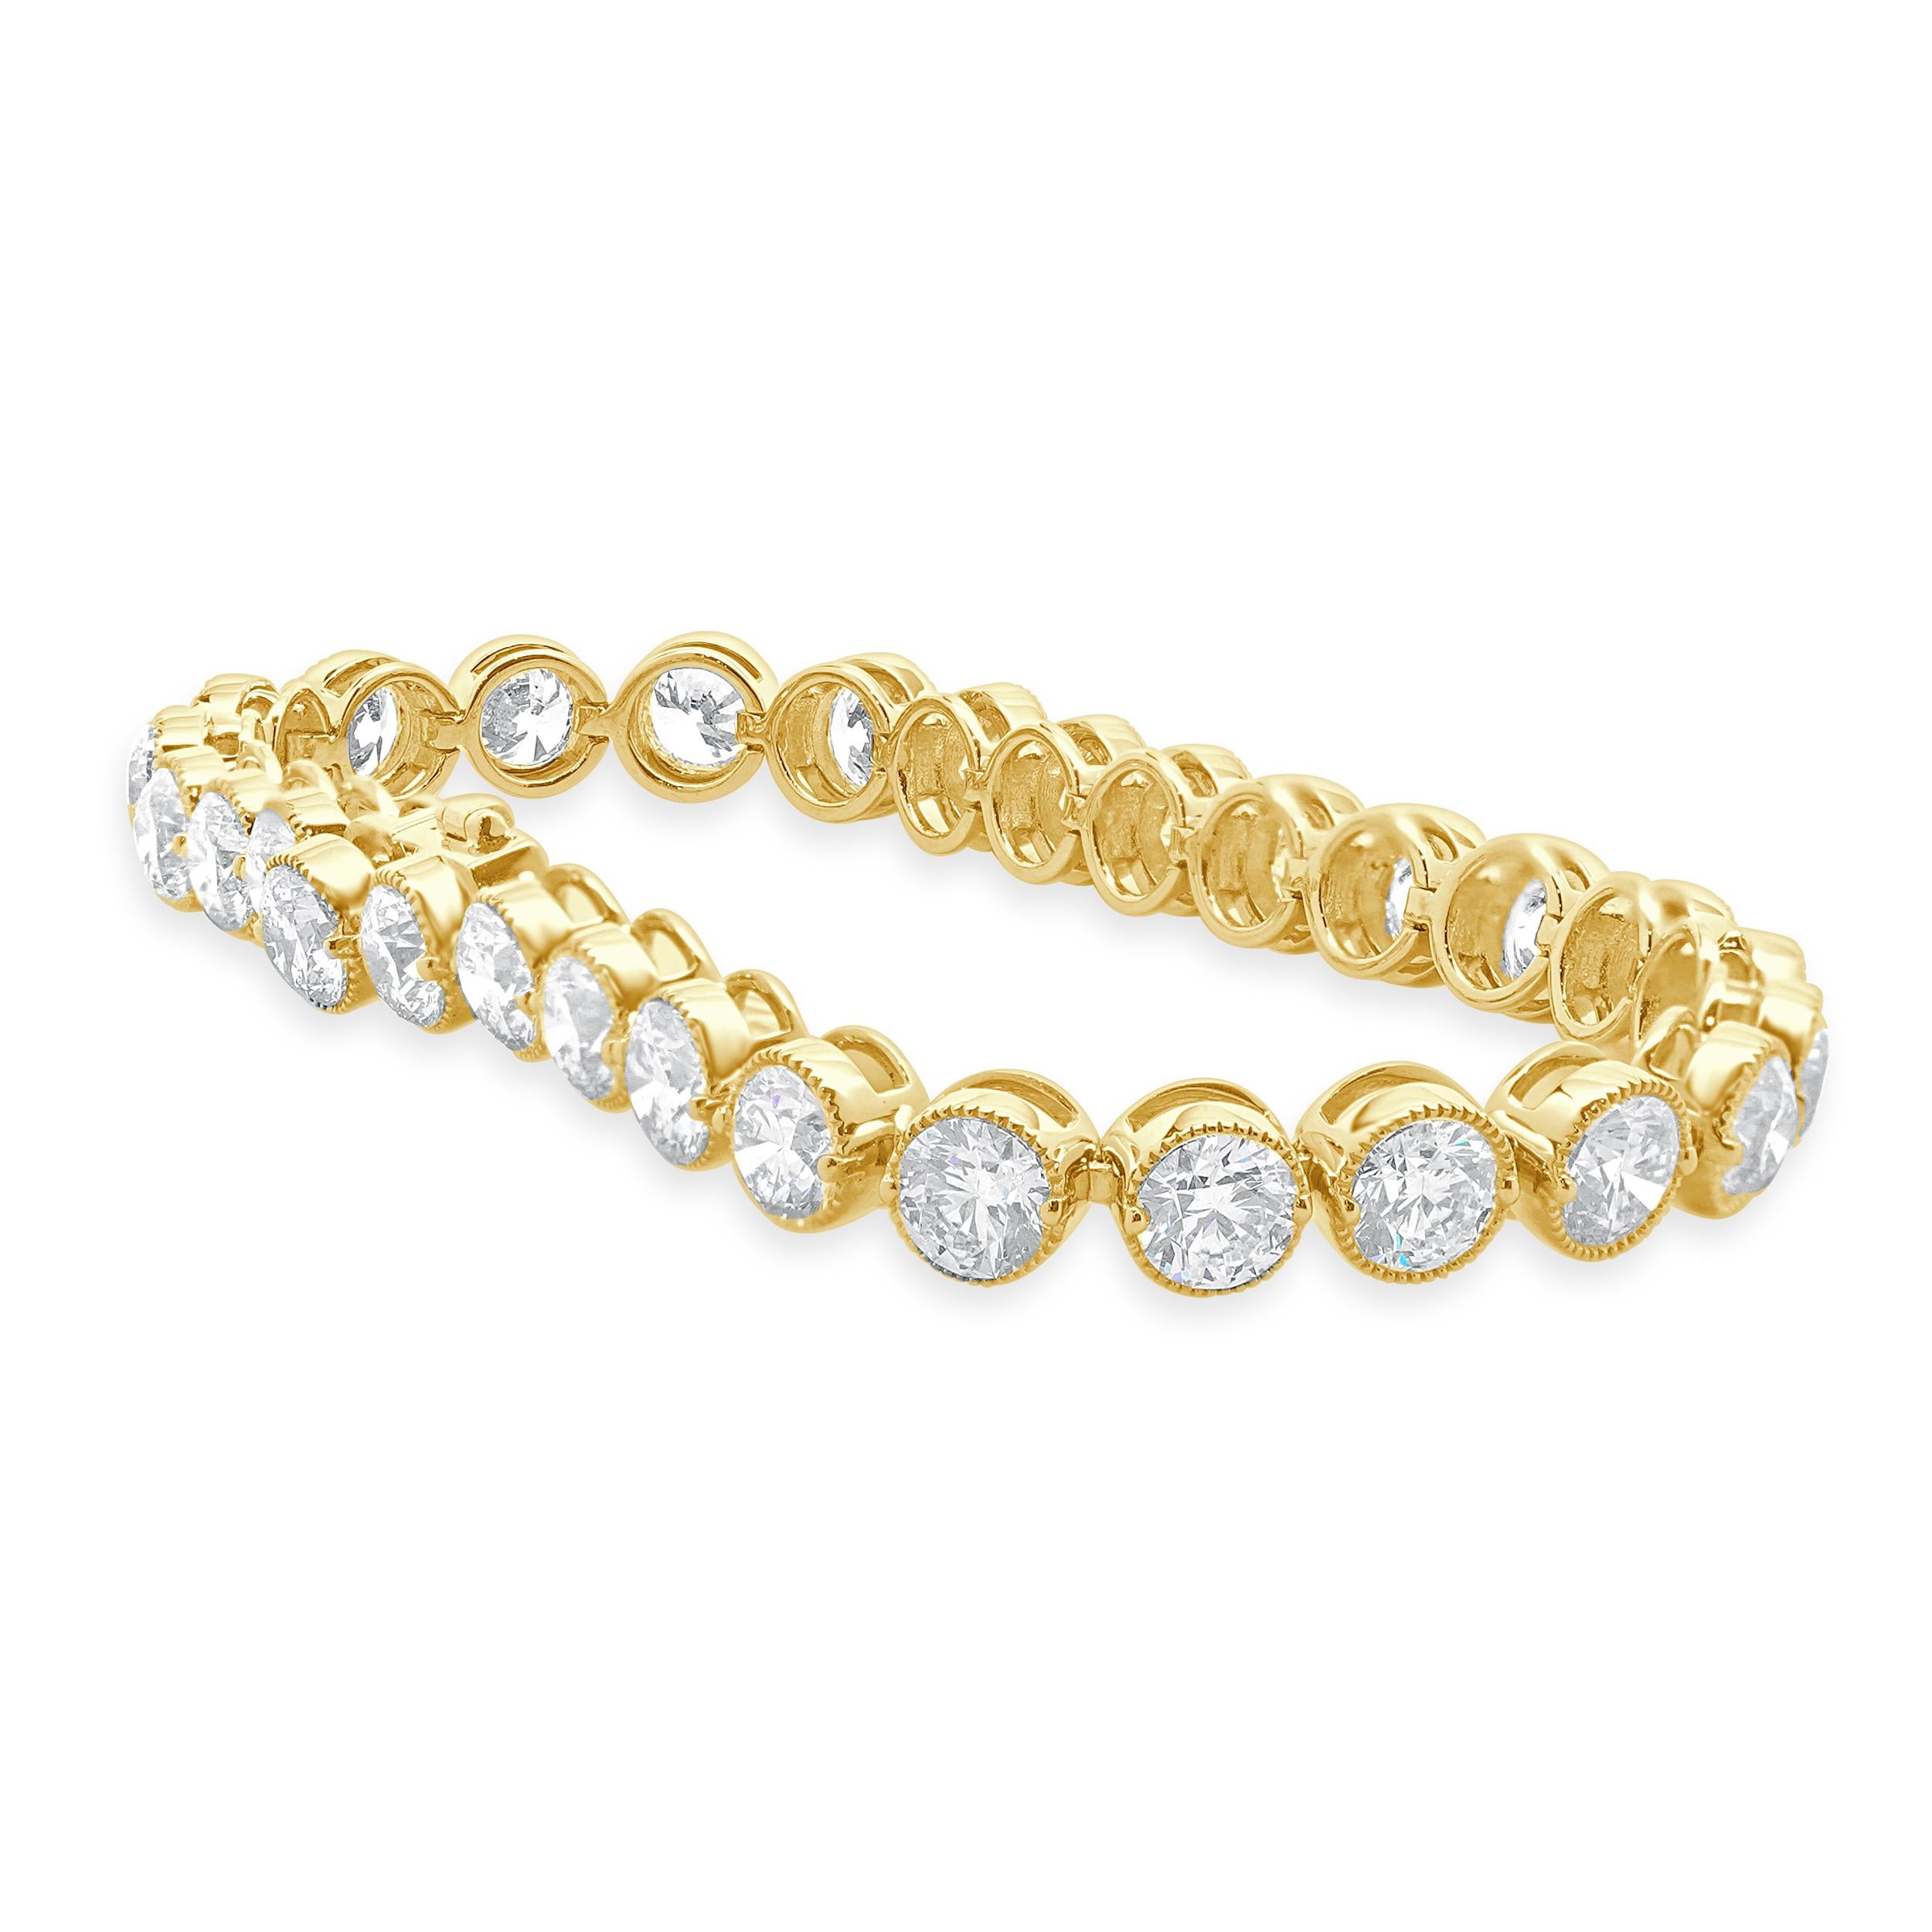 Designer: custom design
Material: 18K yellow gold
Diamond: 29 round brilliant = 14.80cttw
Color: H
Clarity: SI1
Dimensions: bracelet will fit up to a 7-inch wrist
Weight: 20.68 grams
